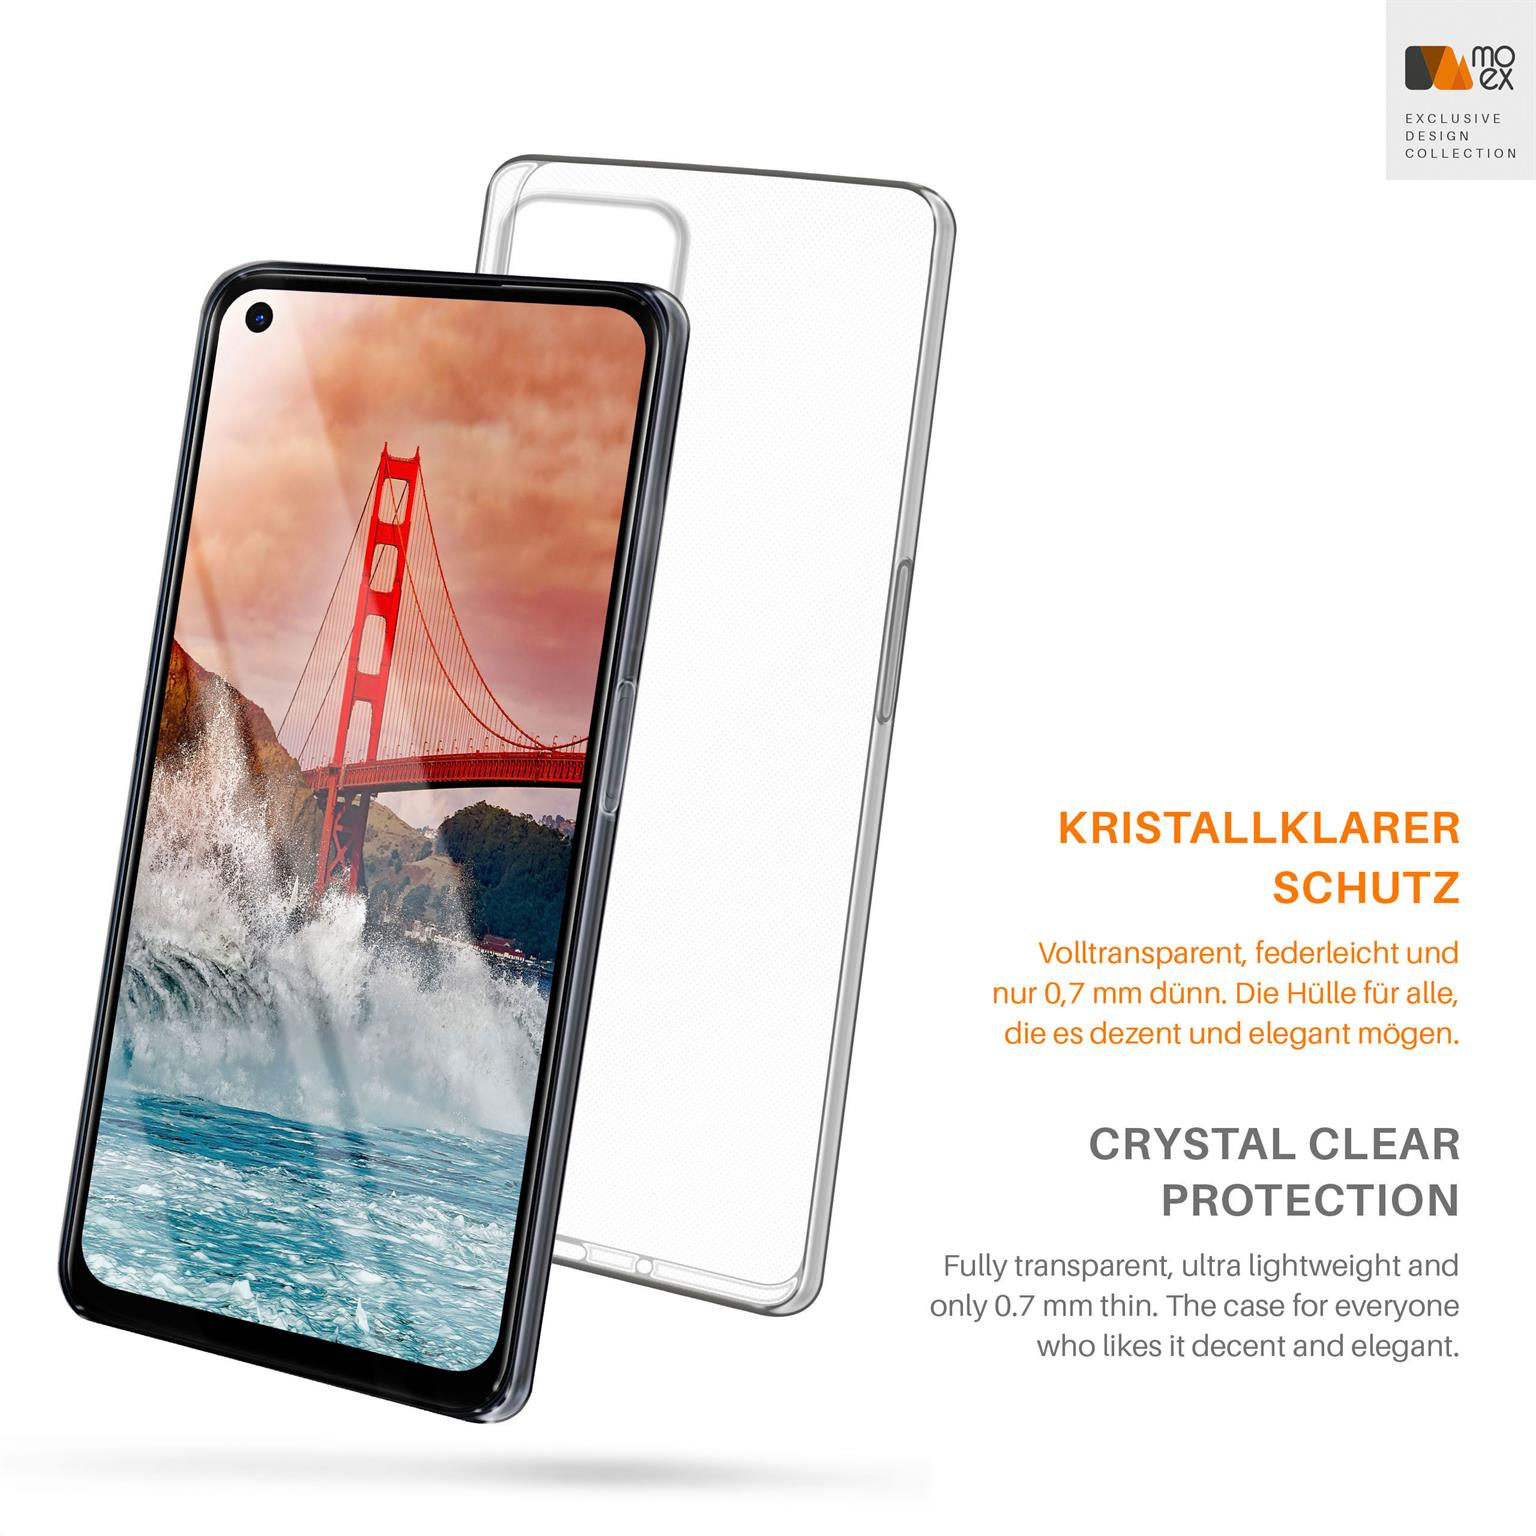 Crystal-Clear A73 Oppo, 5G, Case, MOEX Aero Backcover,